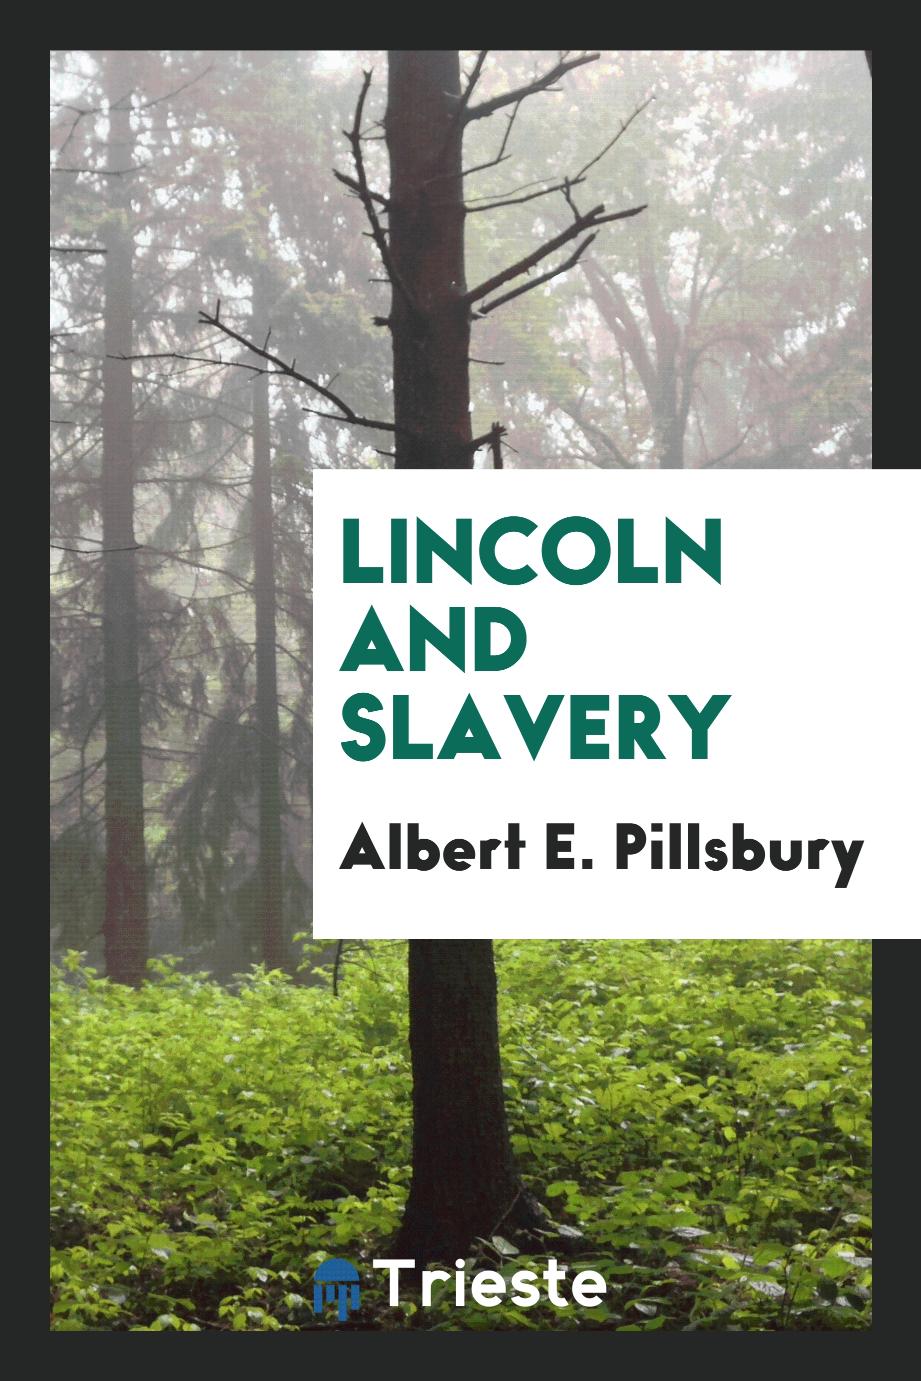 Lincoln and slavery